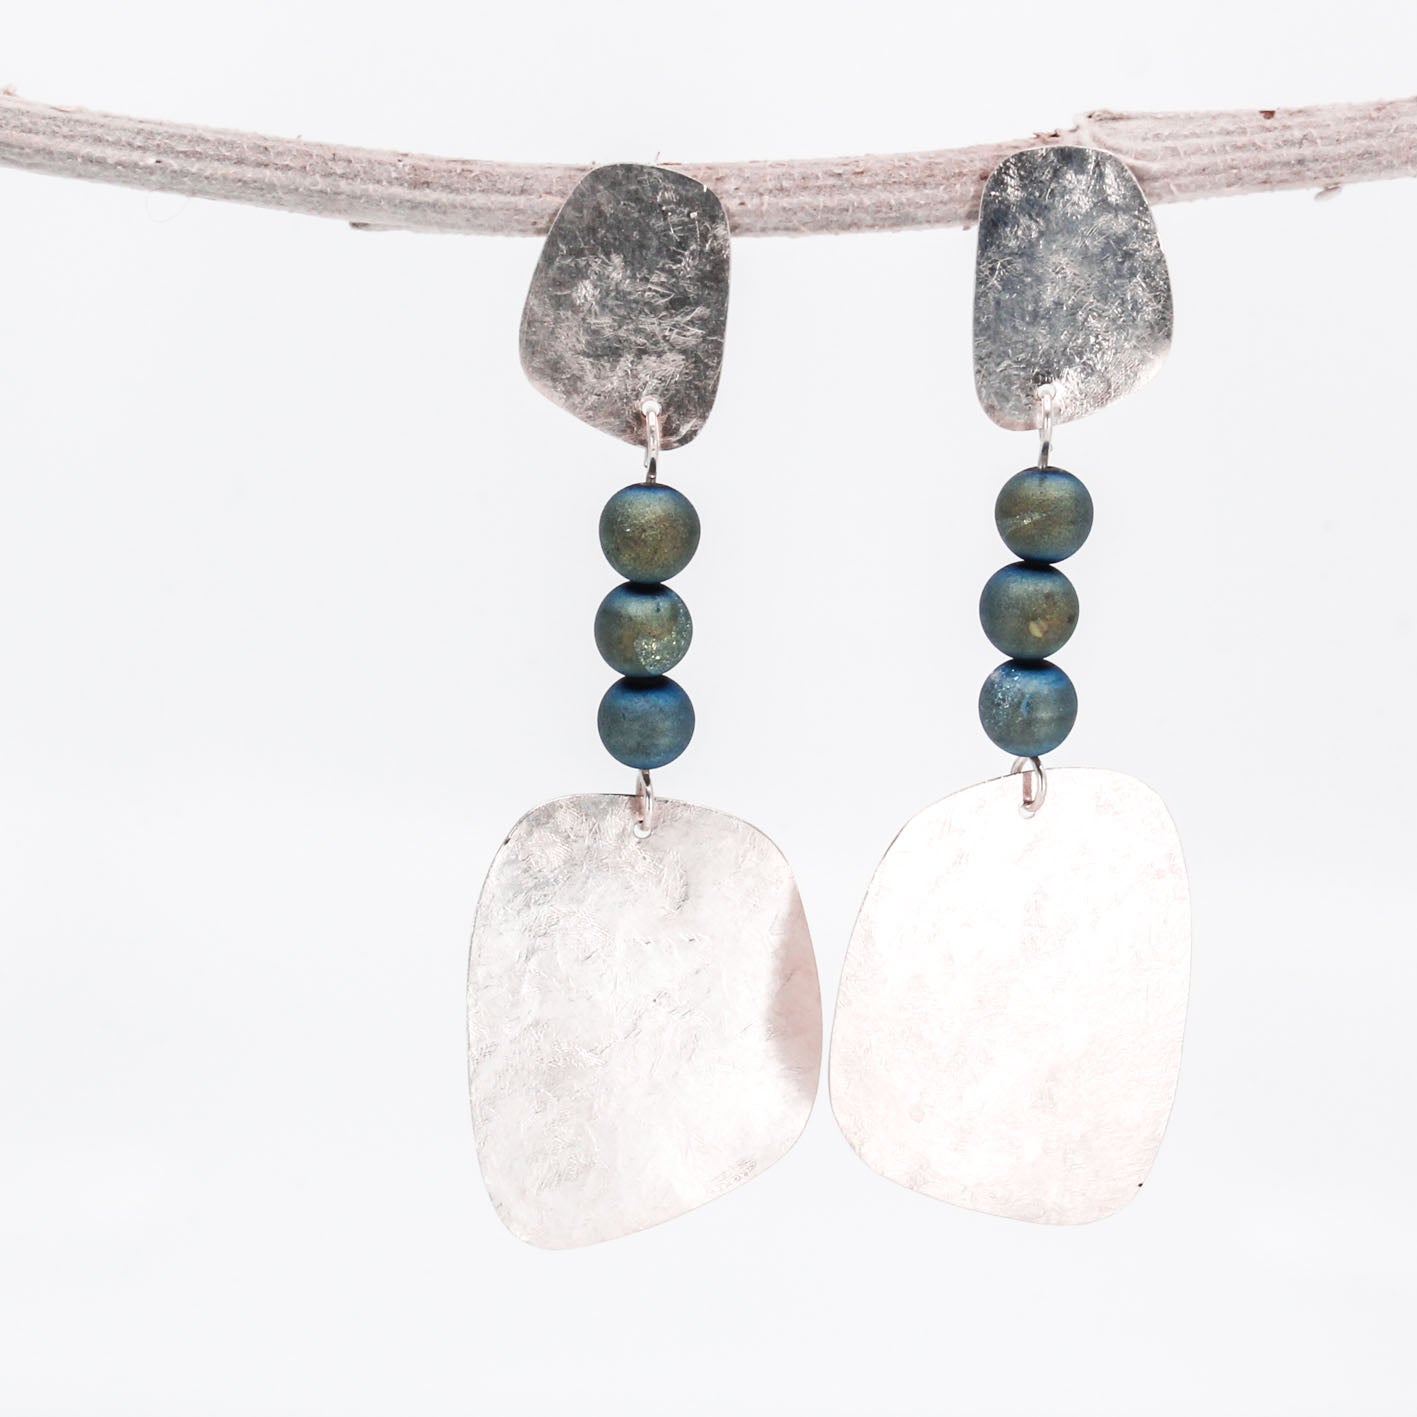 long drop sterling silver earrings with blue green agate beads